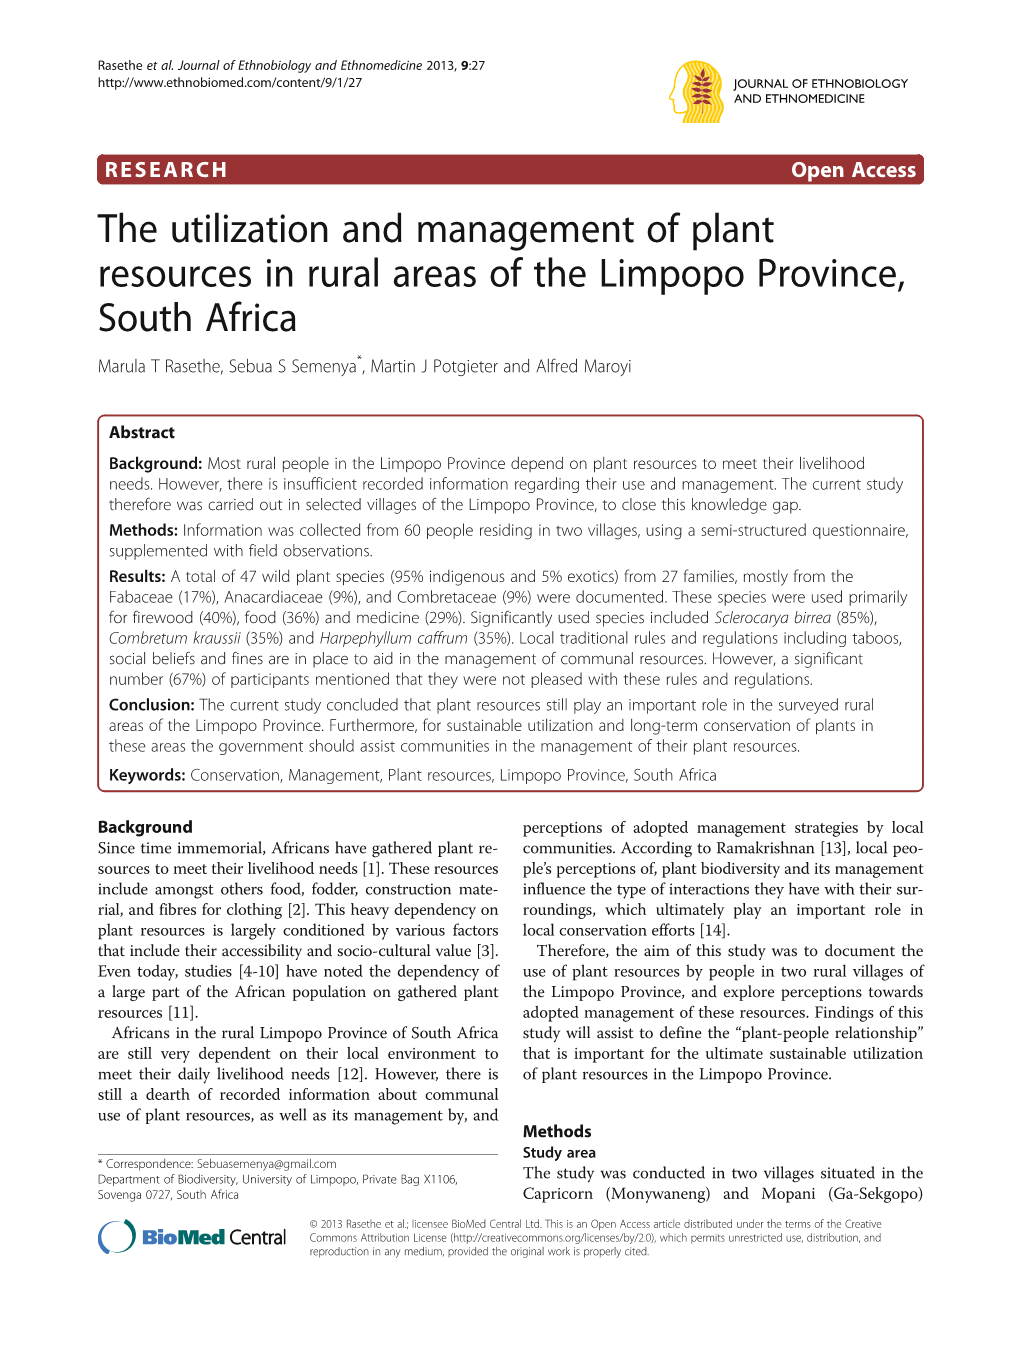 The Utilization and Management of Plant Resources in Rural Areas of The